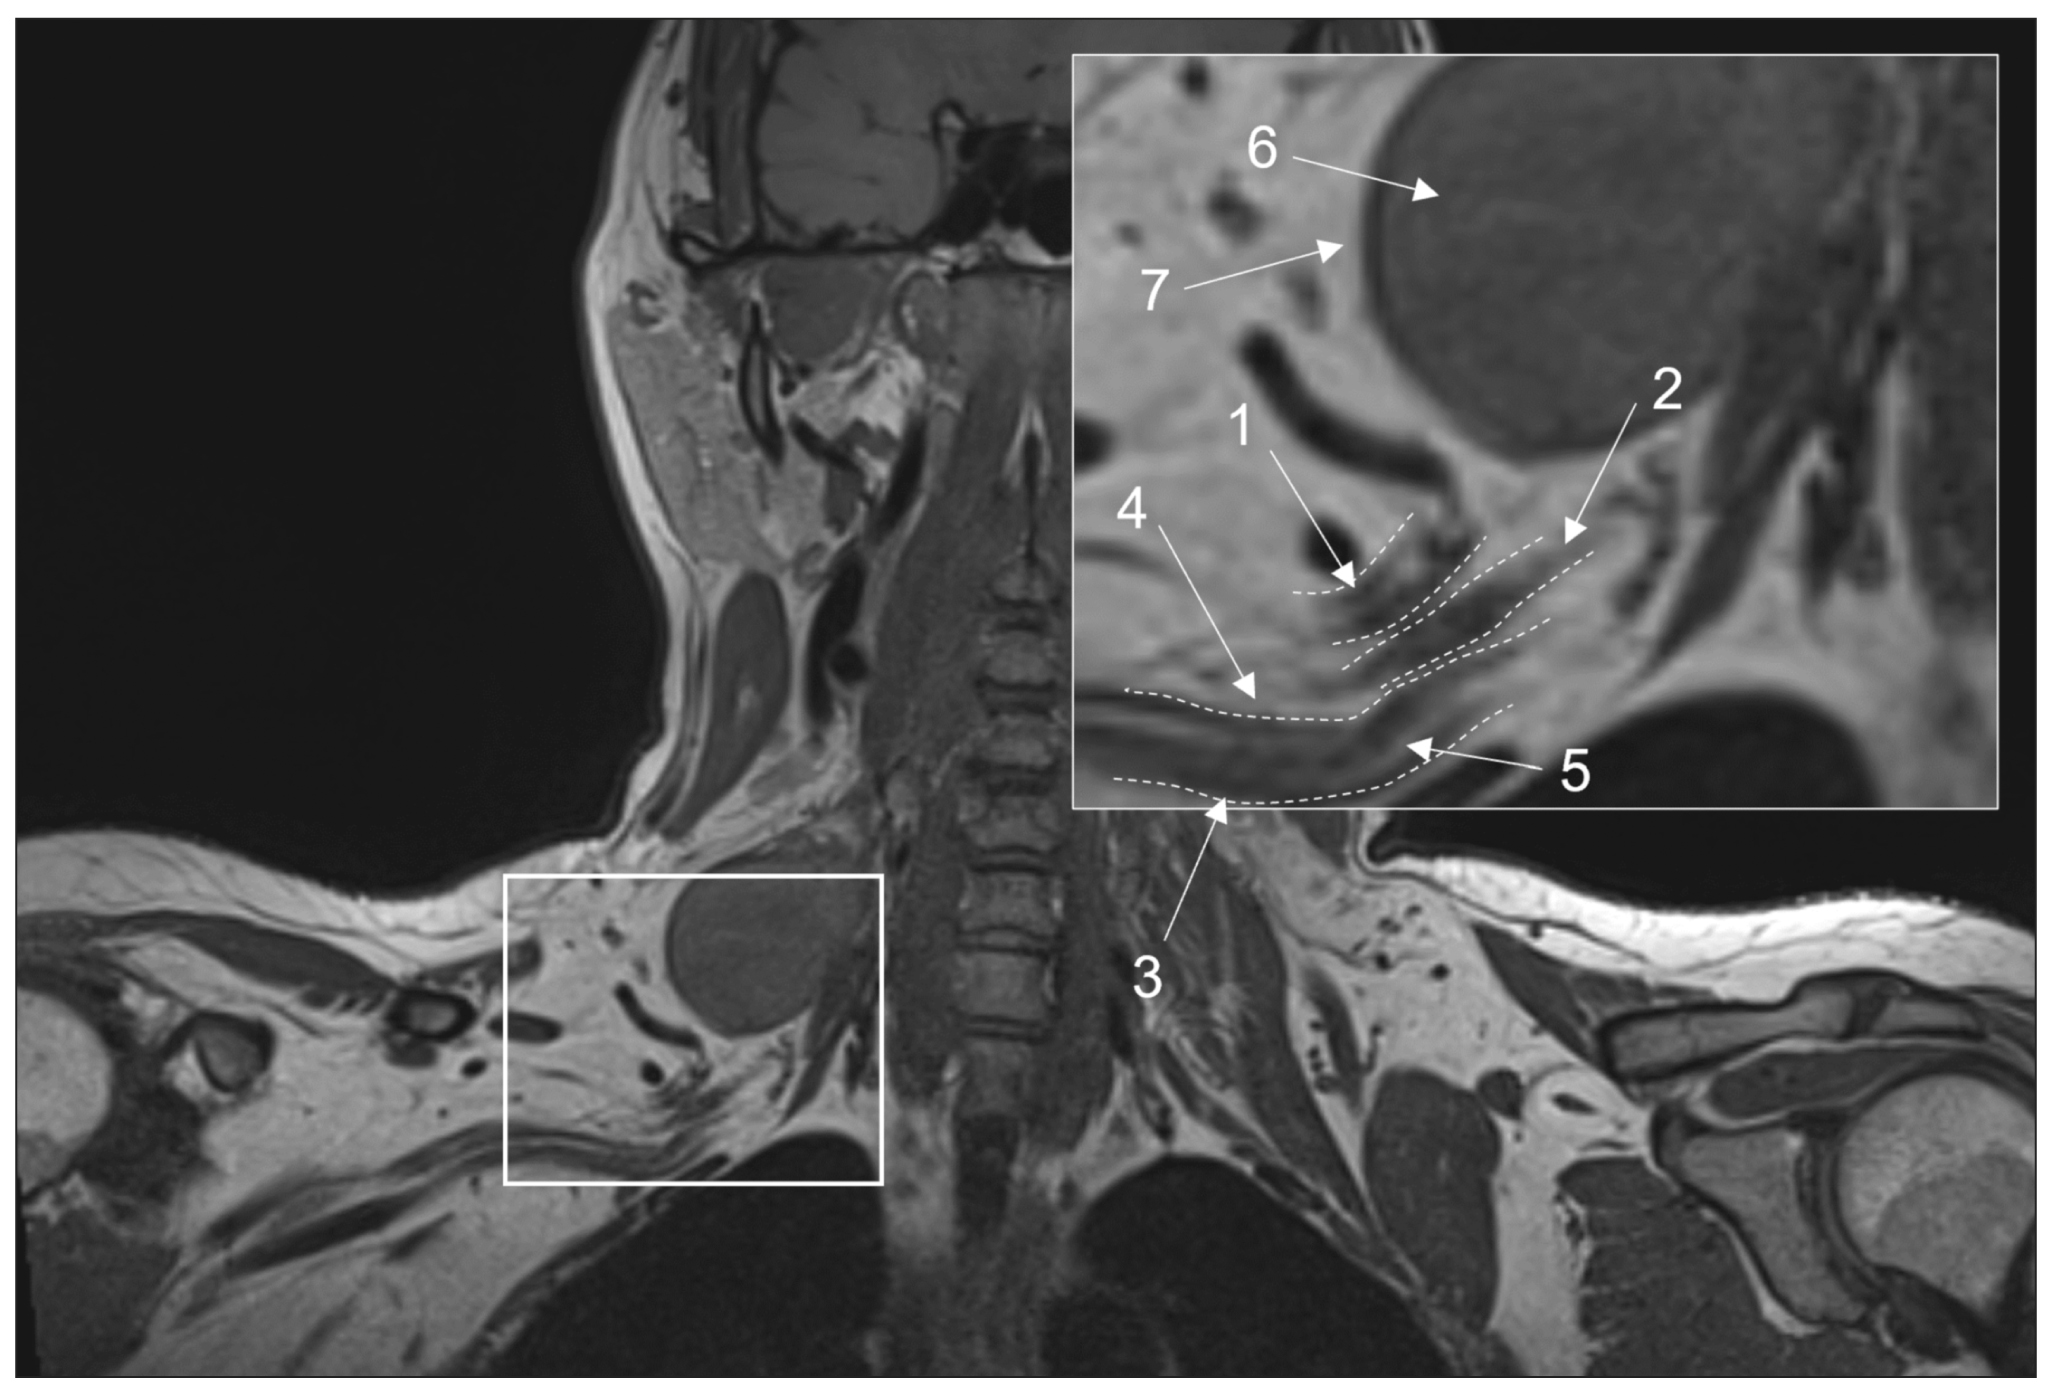 Conventional magnetic resonance imaging of peripheral nerves: MR-neurography